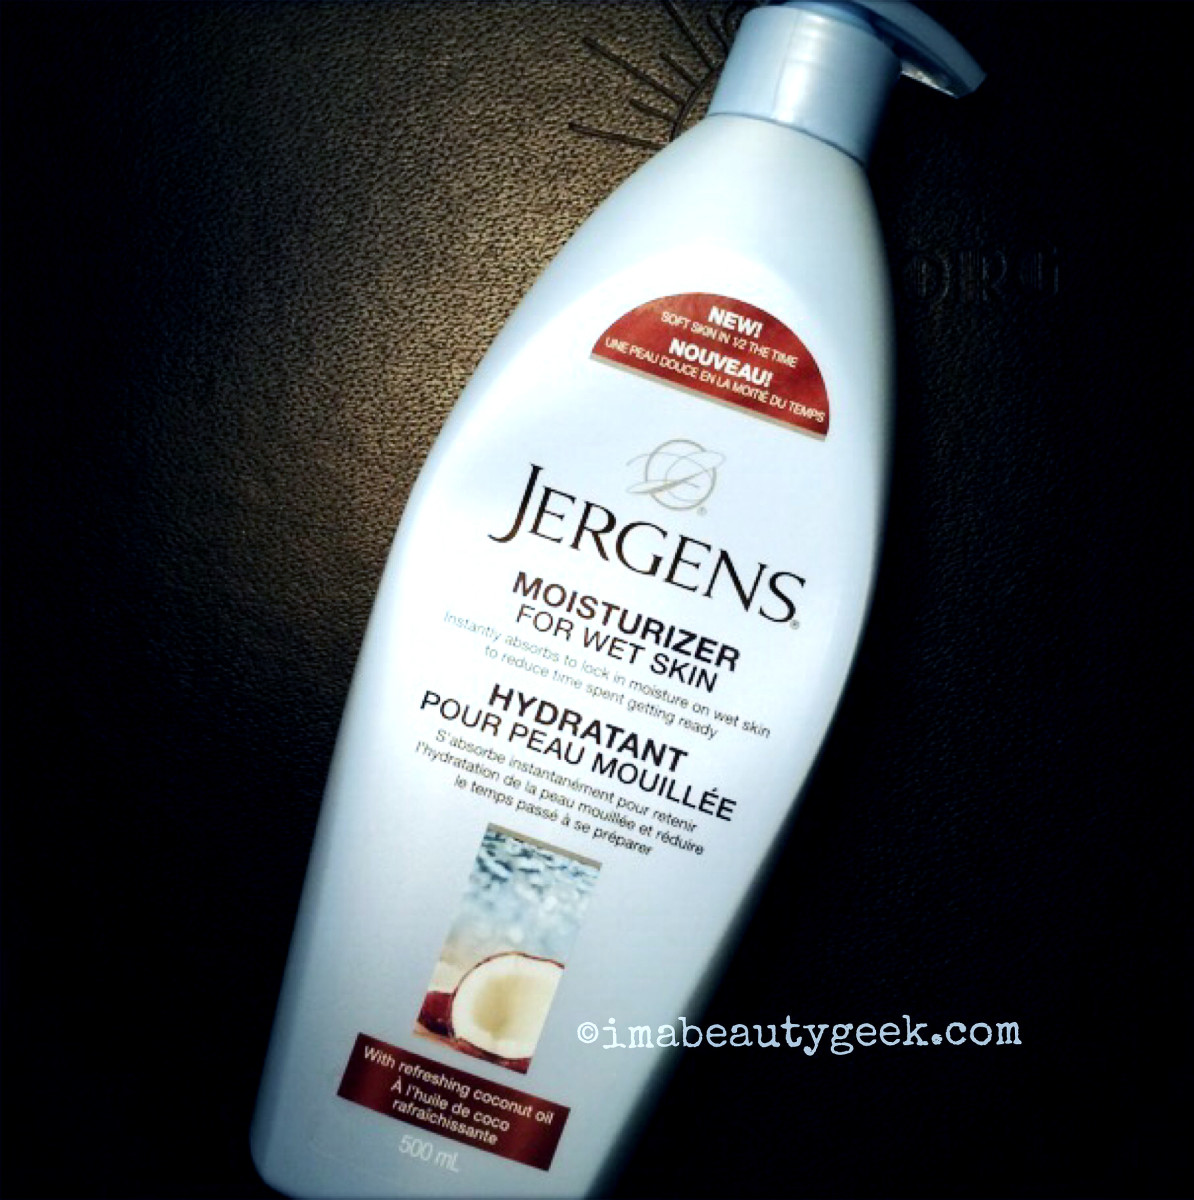 Jergens Moisturizer for Wet Skin with Coconut Oil